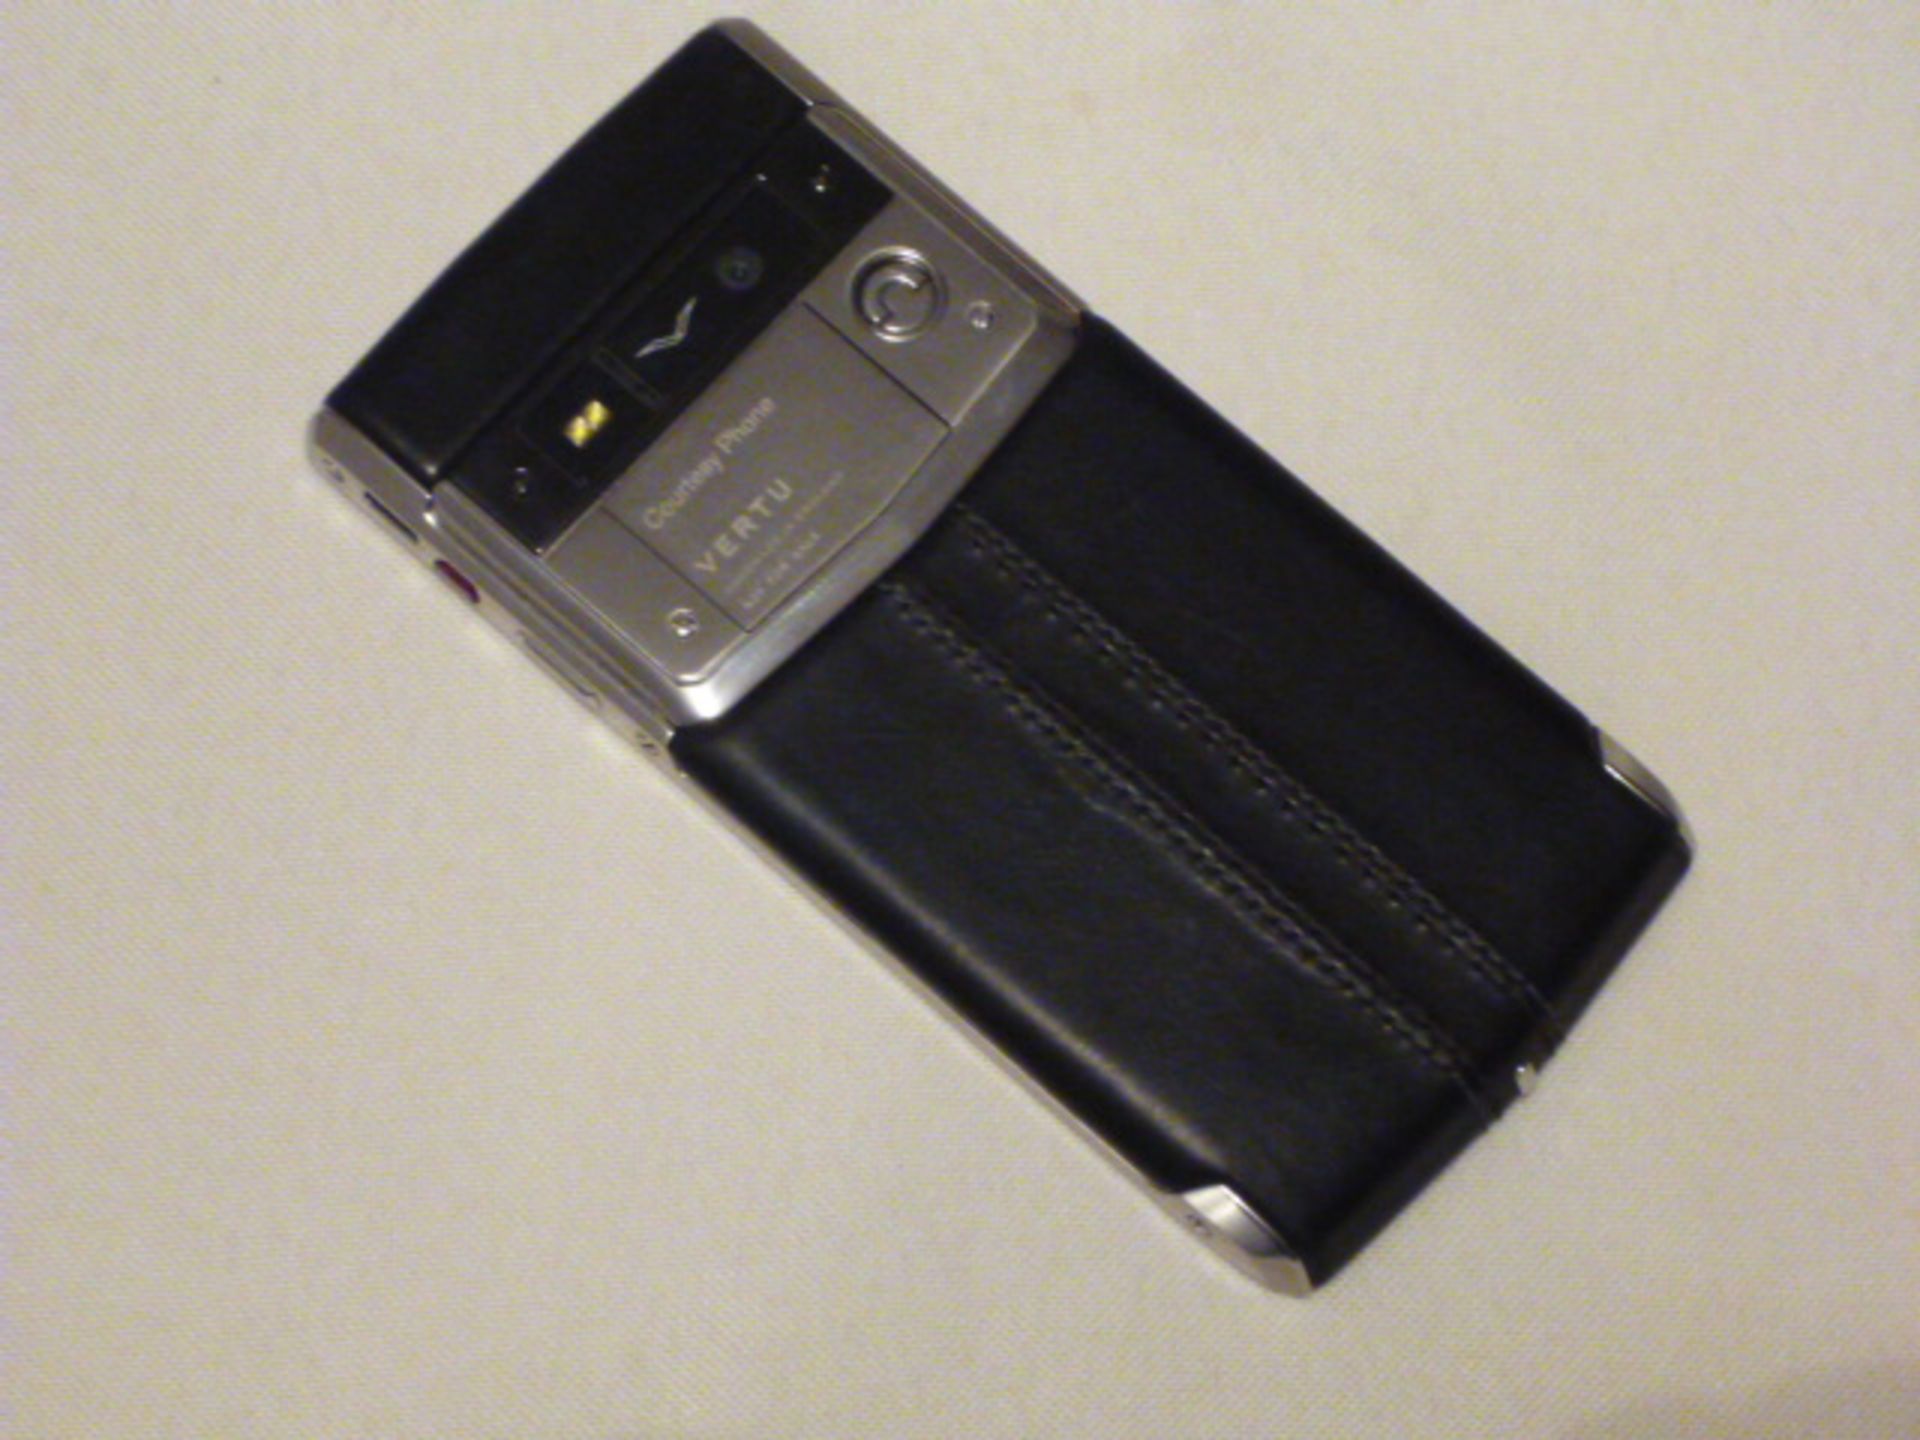 Vertu Signature Touch Jet Calf, Courtesy Phone, S/N E-013126. Tested Working, but without Warranty - Bild 2 aus 2